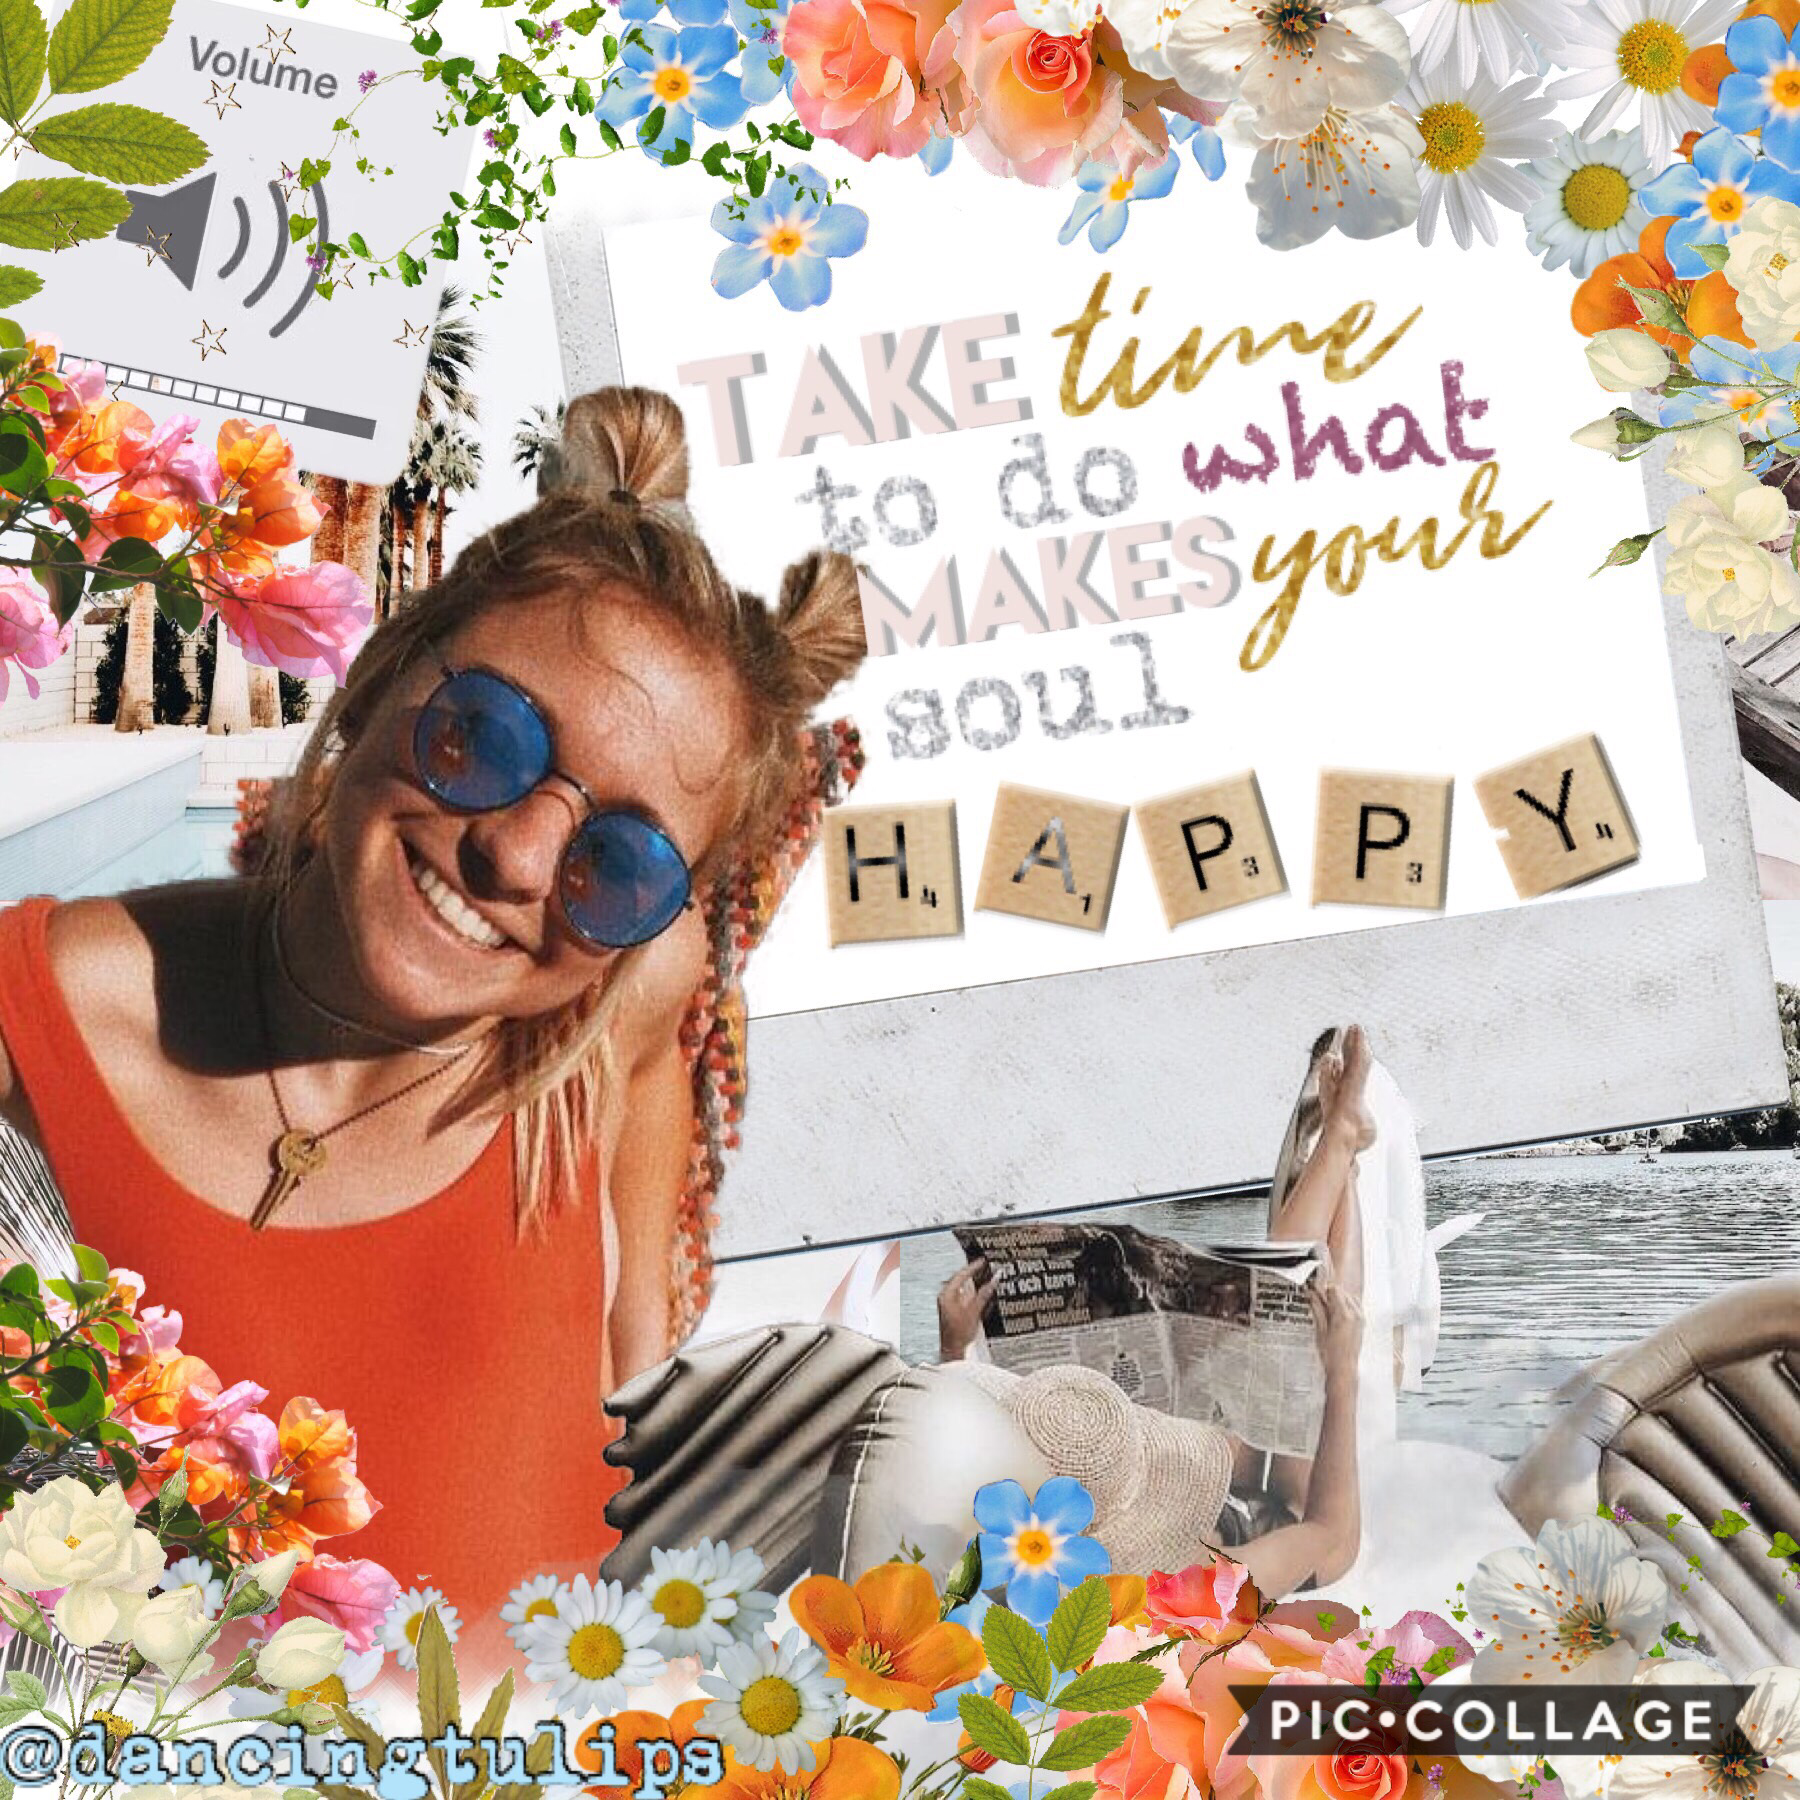 be happy! tappity 🍡🦋🐛
I’ve used so many accounts for inspiration for this, thanks to everyone who has helped me fit into pic collage it’s a pleasure being here 🦄💍💕 thank you! Let’s get to 50 followers!